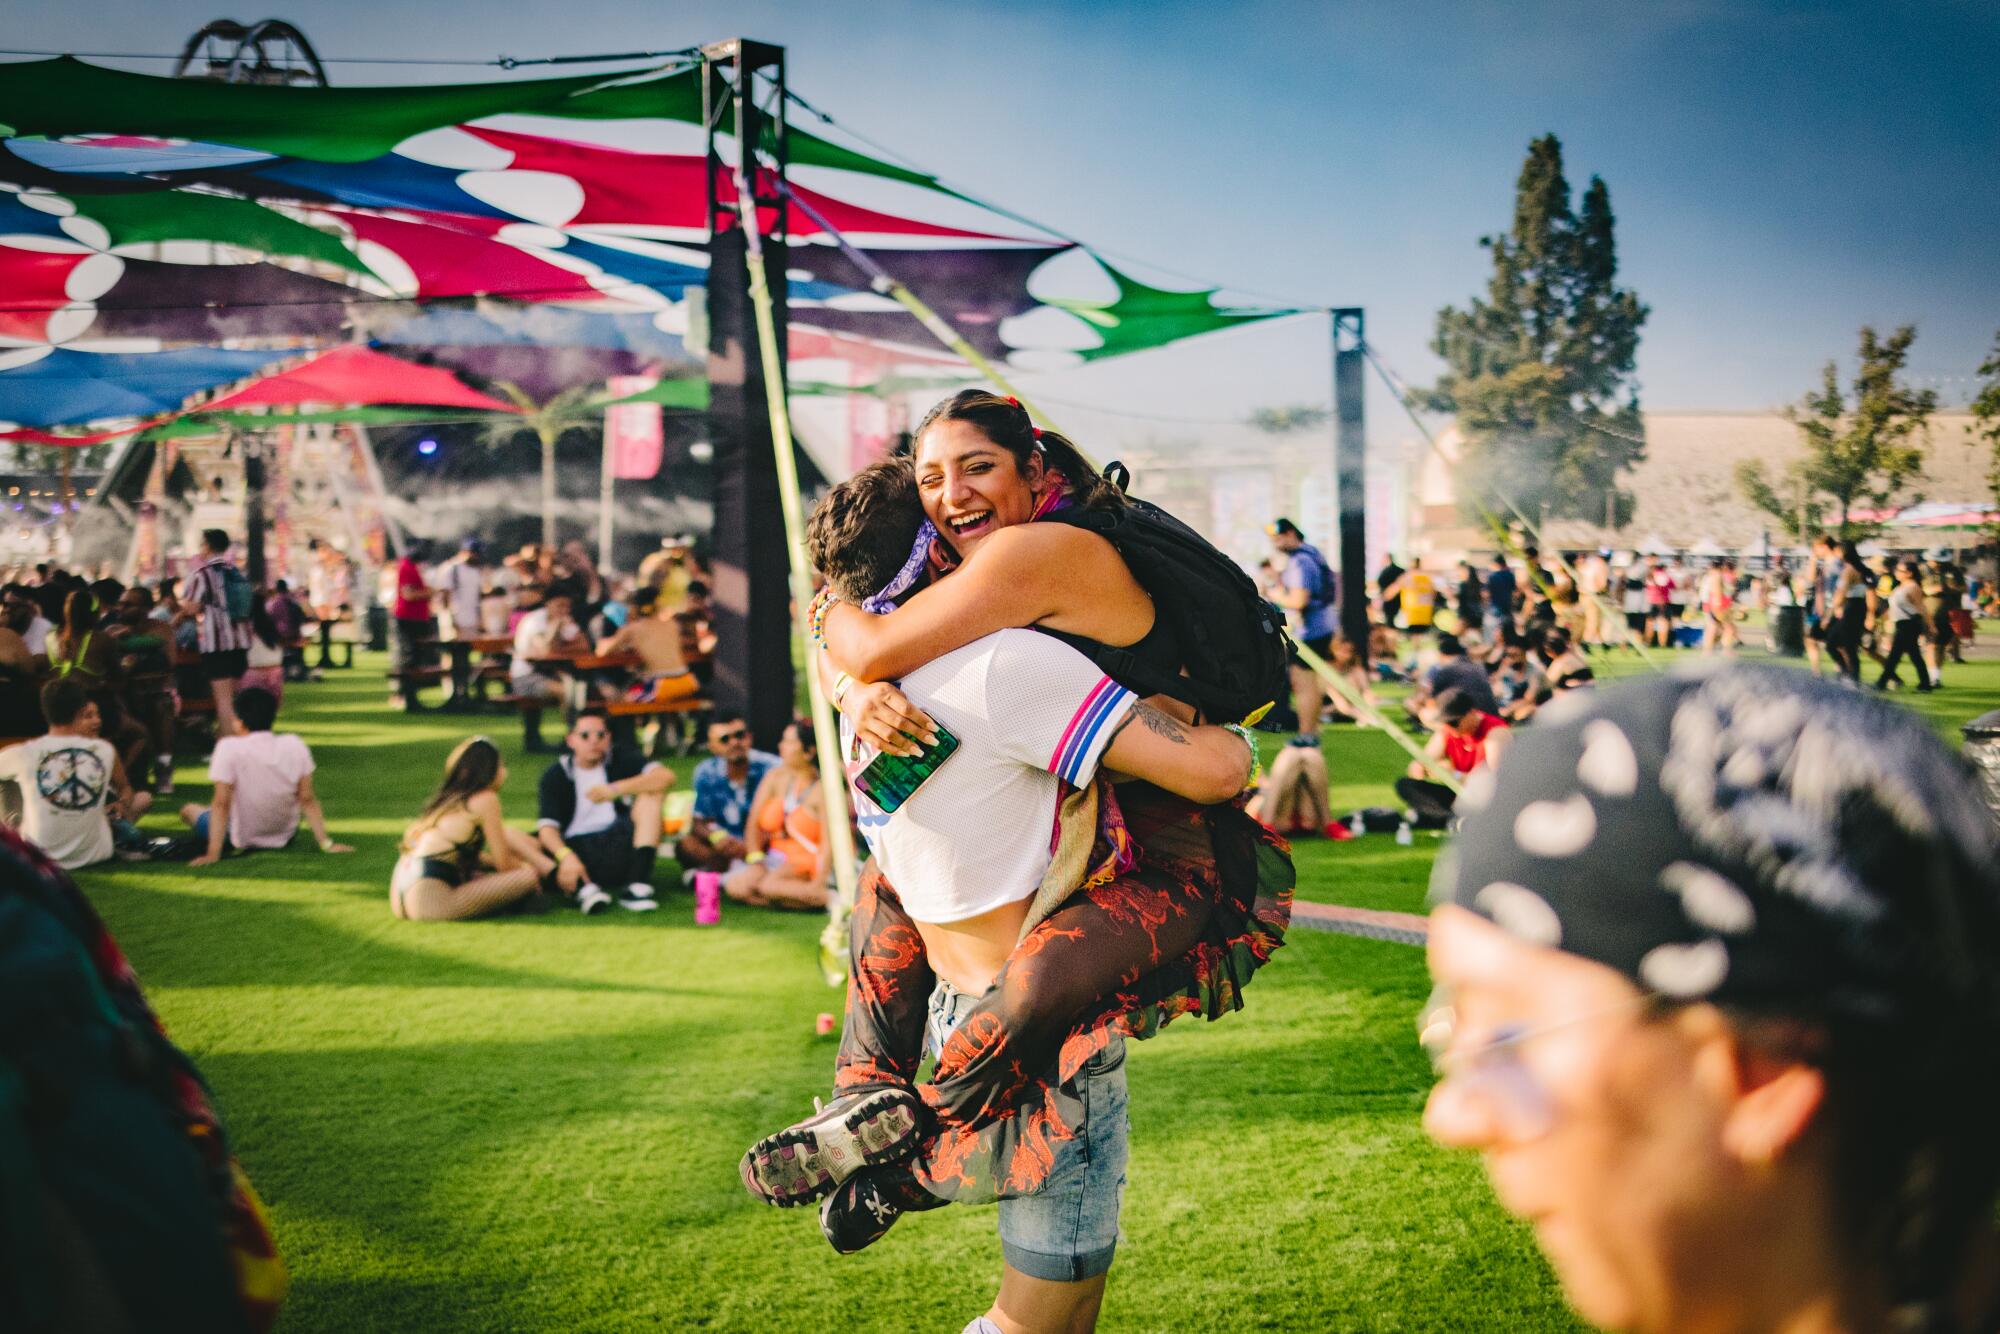 Two people embracing on a lawn at a festival.